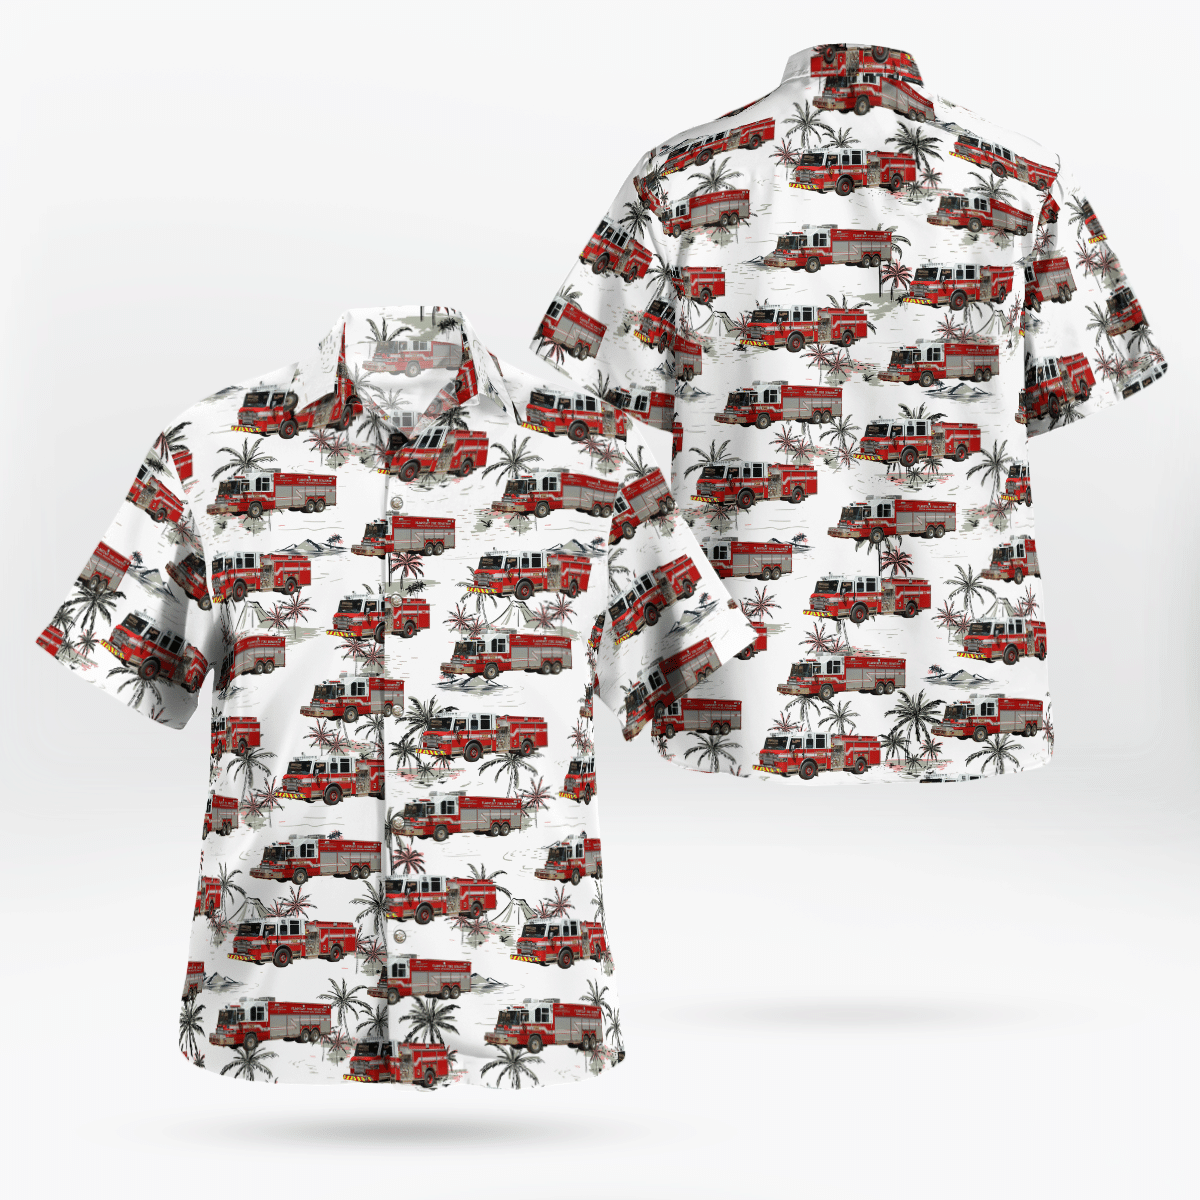 If you are in need of a new summertime look, pick up this Hawaiian shirt 98